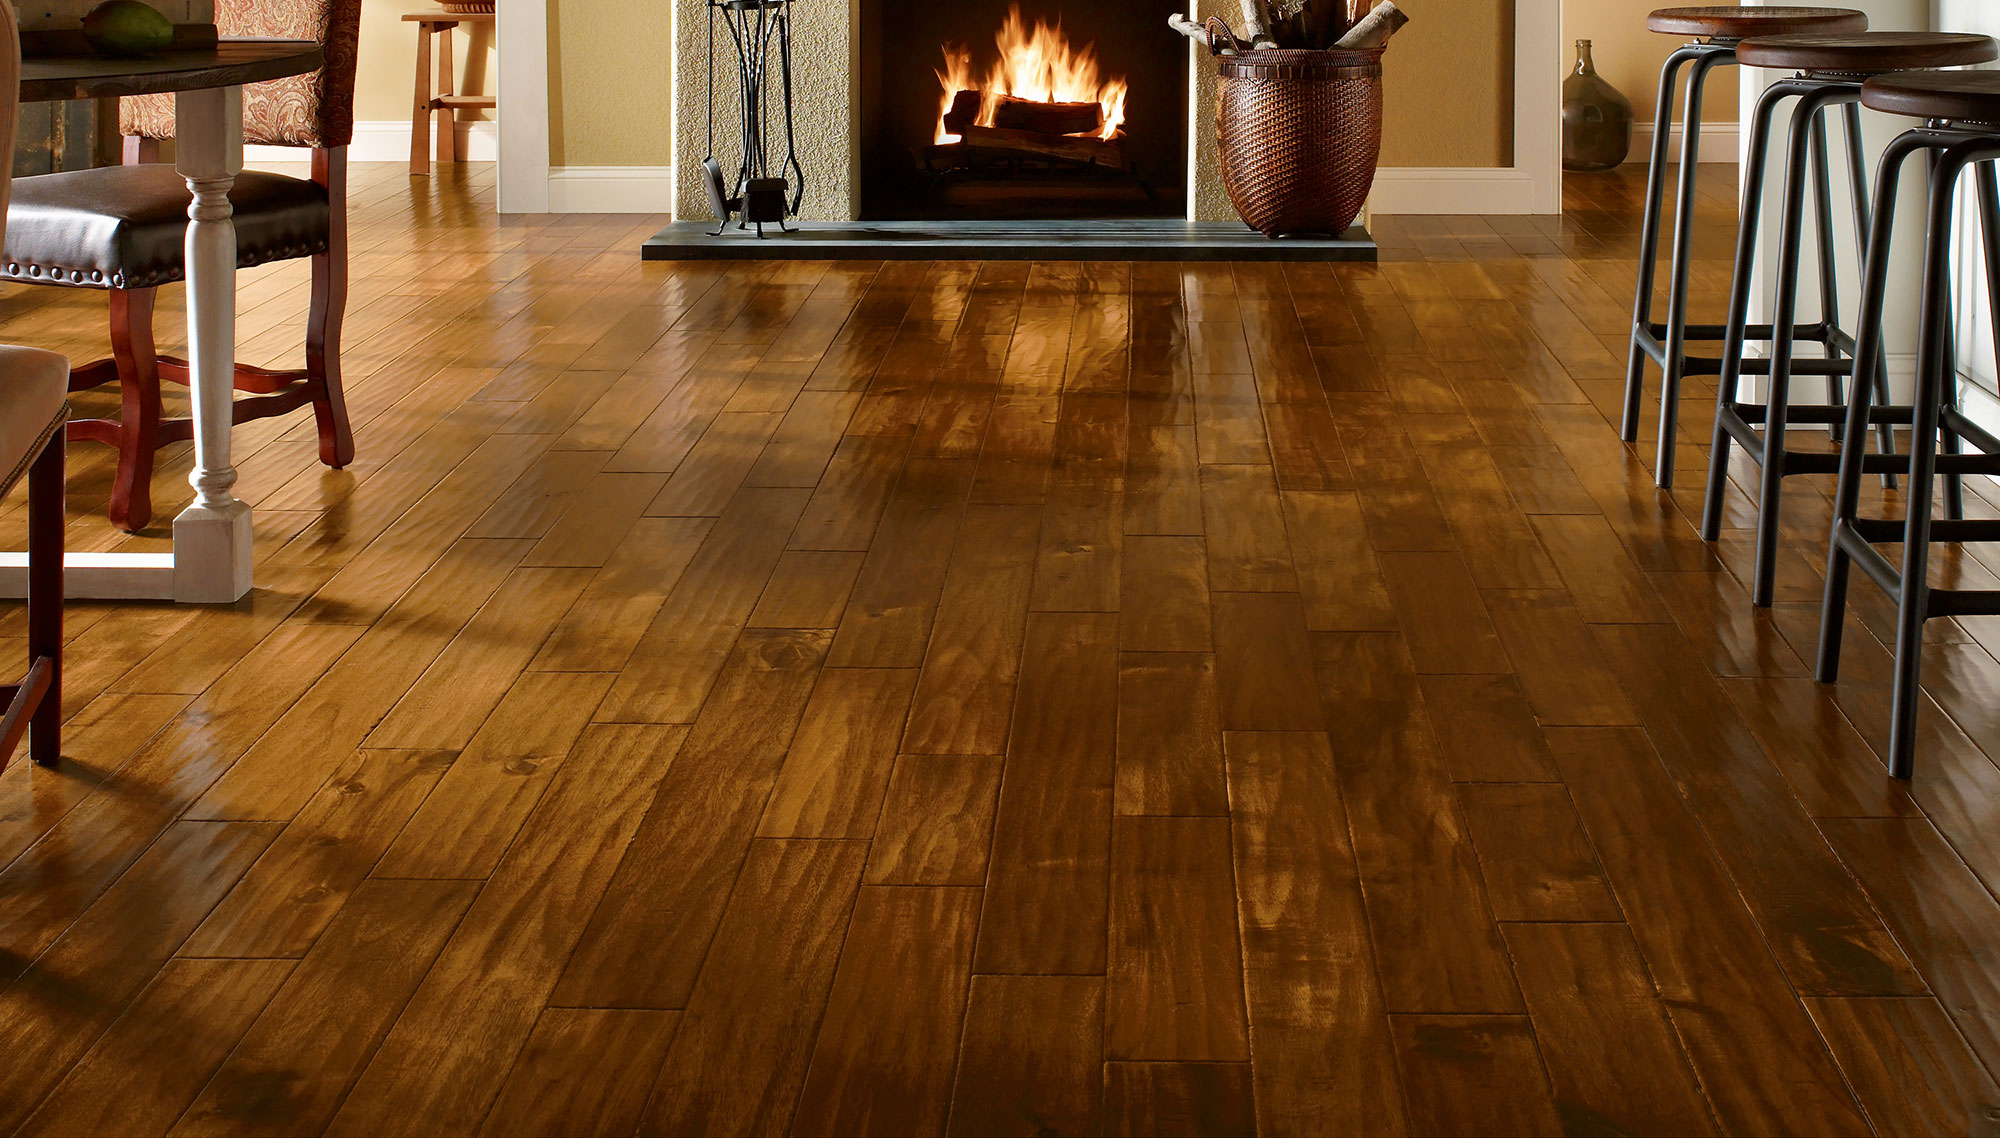 Remolding the floors with wooden flooring